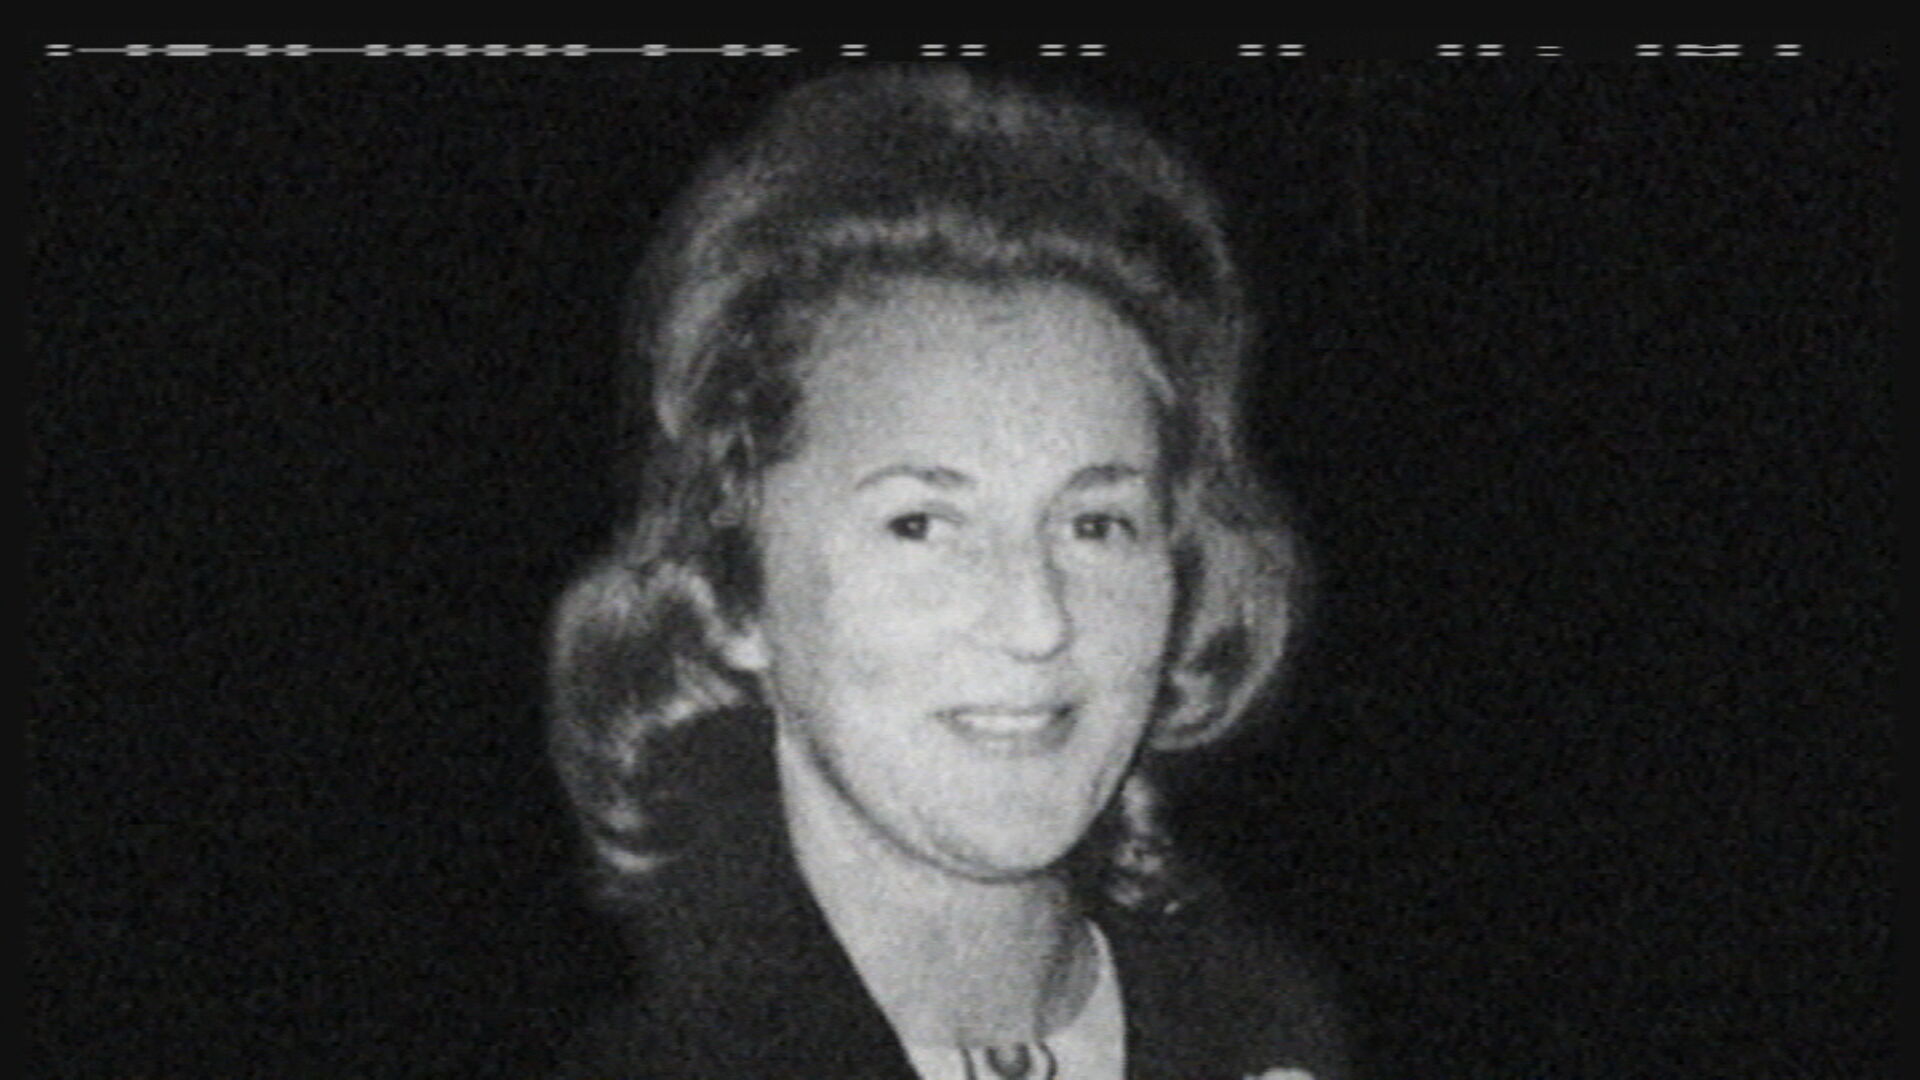 Renee MacRae is thought to have been killed in November 1976.